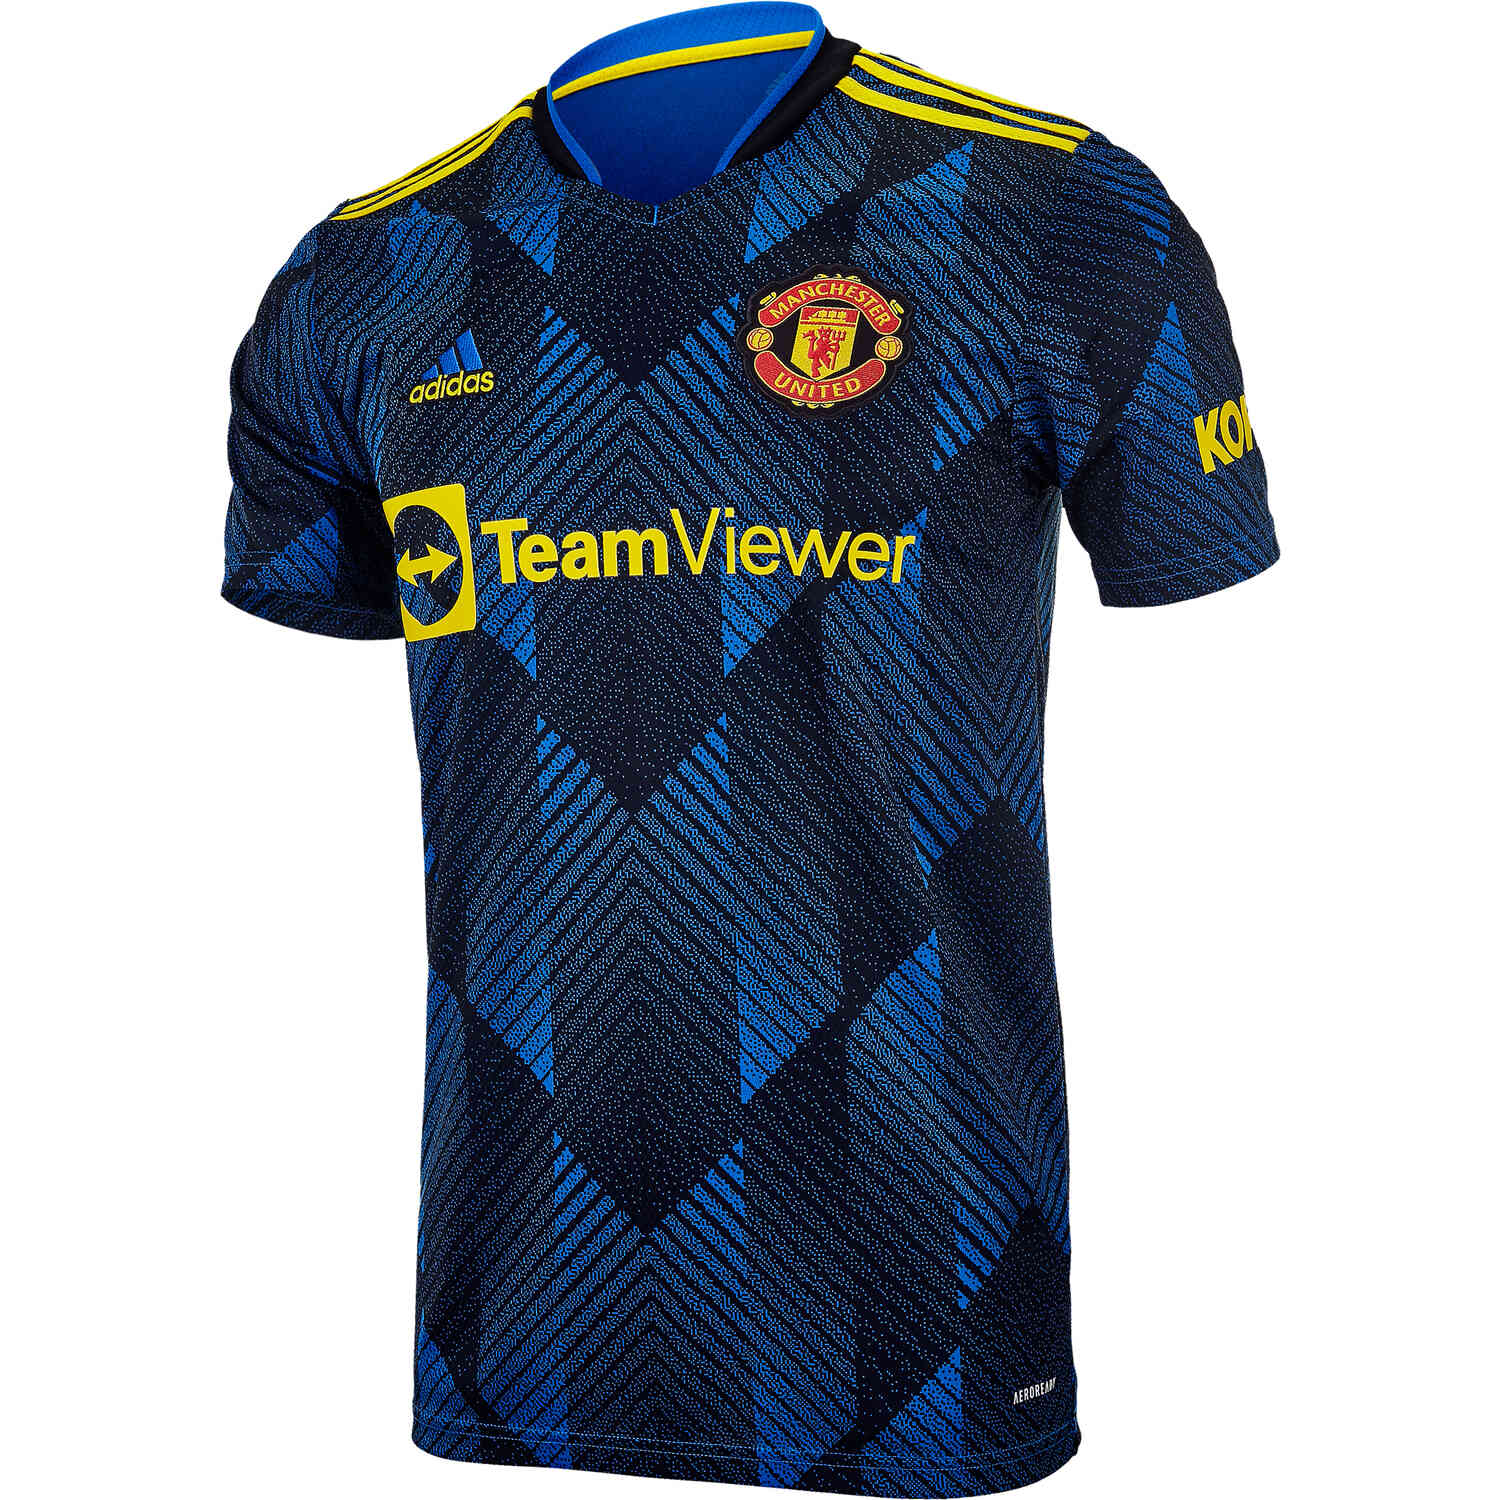 2022/23 adidas Manchester United Home Jersey - Soccer Master